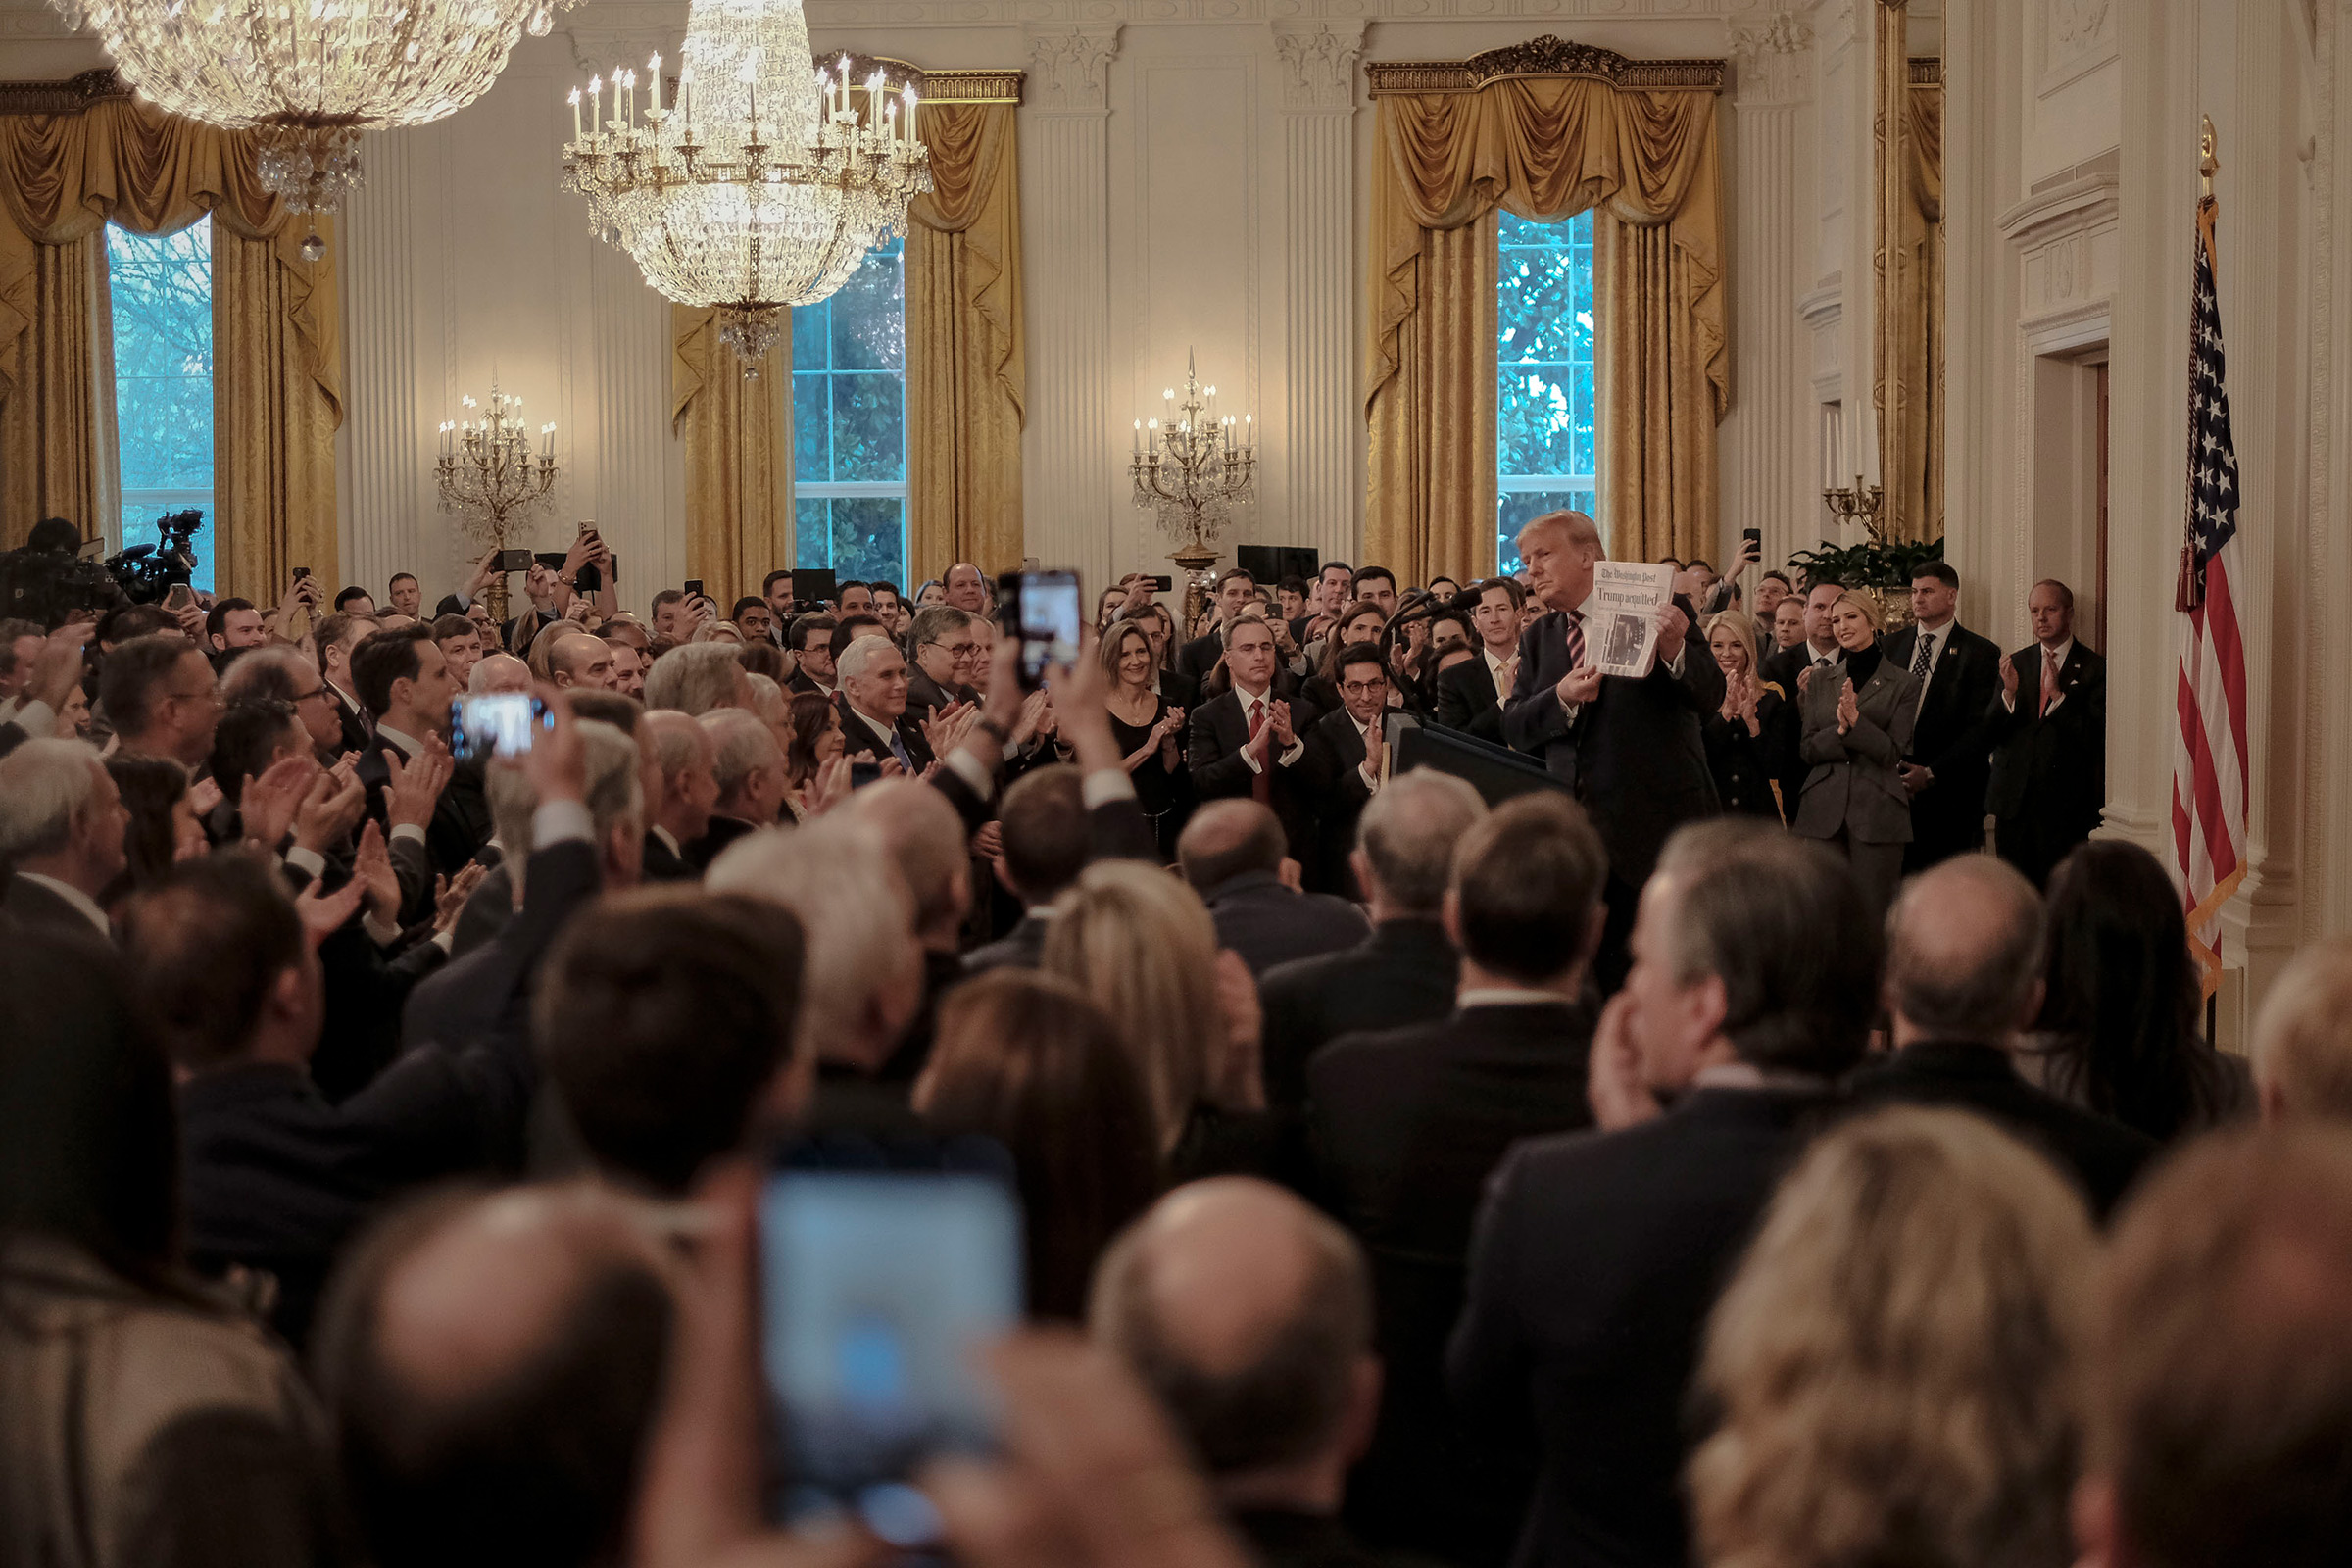 2/6/20, The White House, Washington, D.C. President Donald Trump delivers a post acquittal remarks to supporters in the East Room of the White House in Washington, D.C. on Feb. 6, 2020.Gabriella Demczuk / TIME